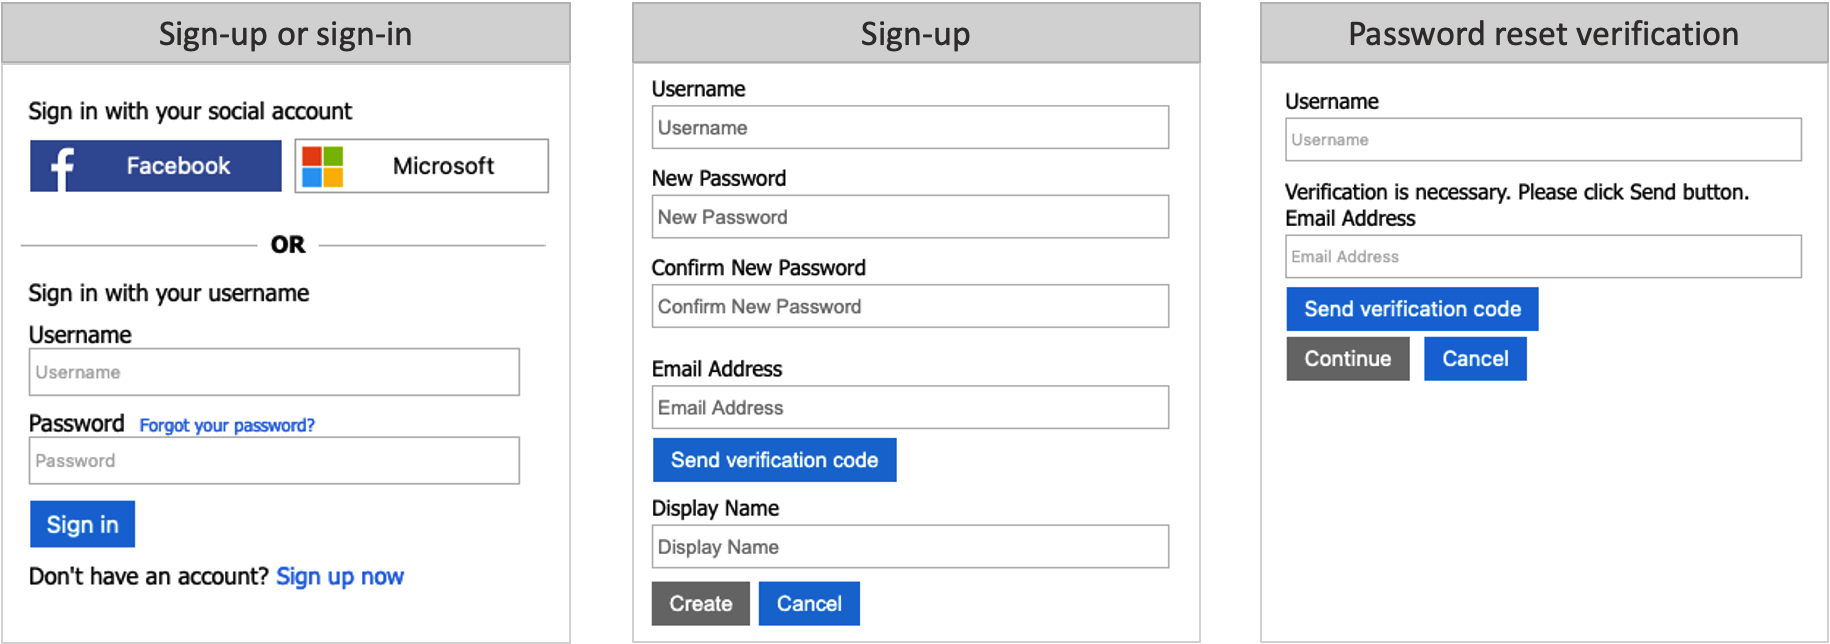 Username sign-up or sign-in experience